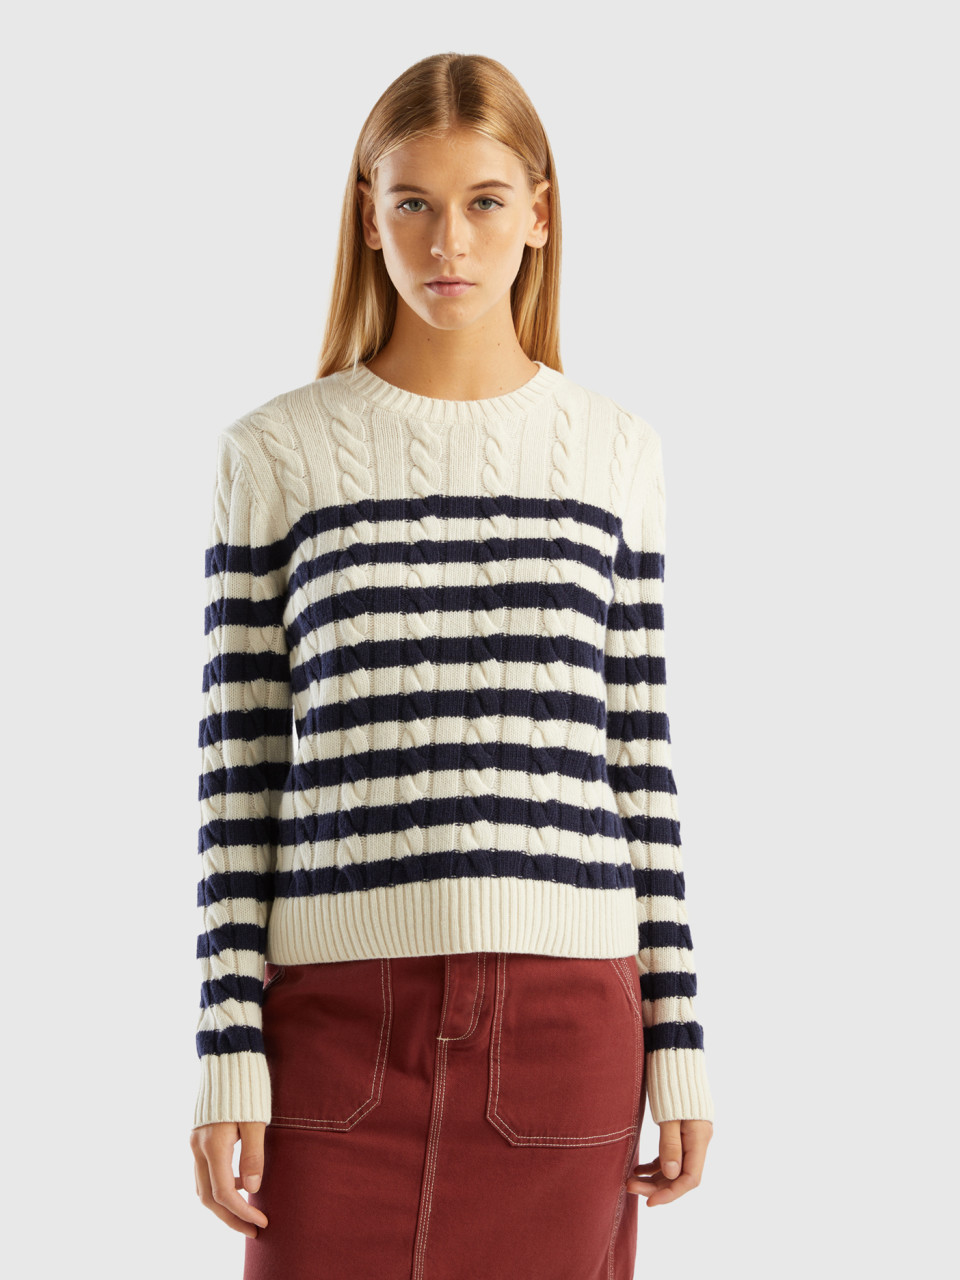 Benetton, Striped Sweater With Cables, White, Women